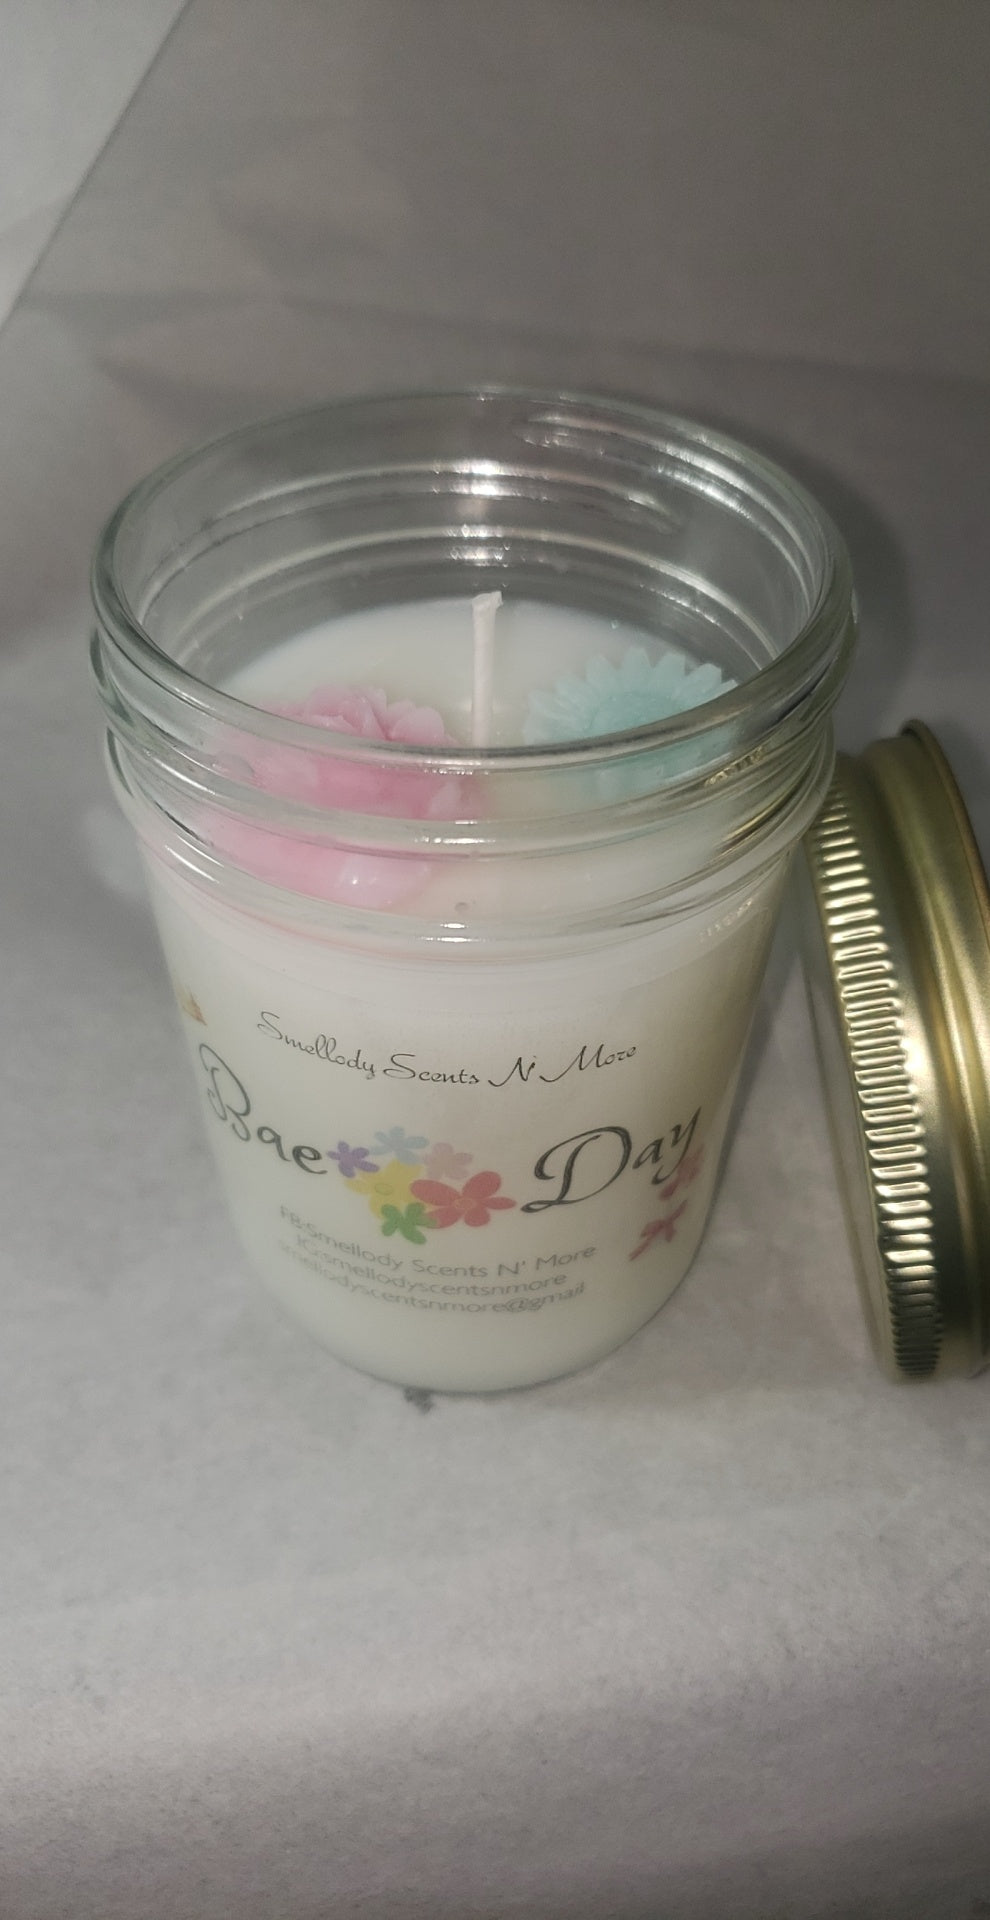 Bae Day Candle